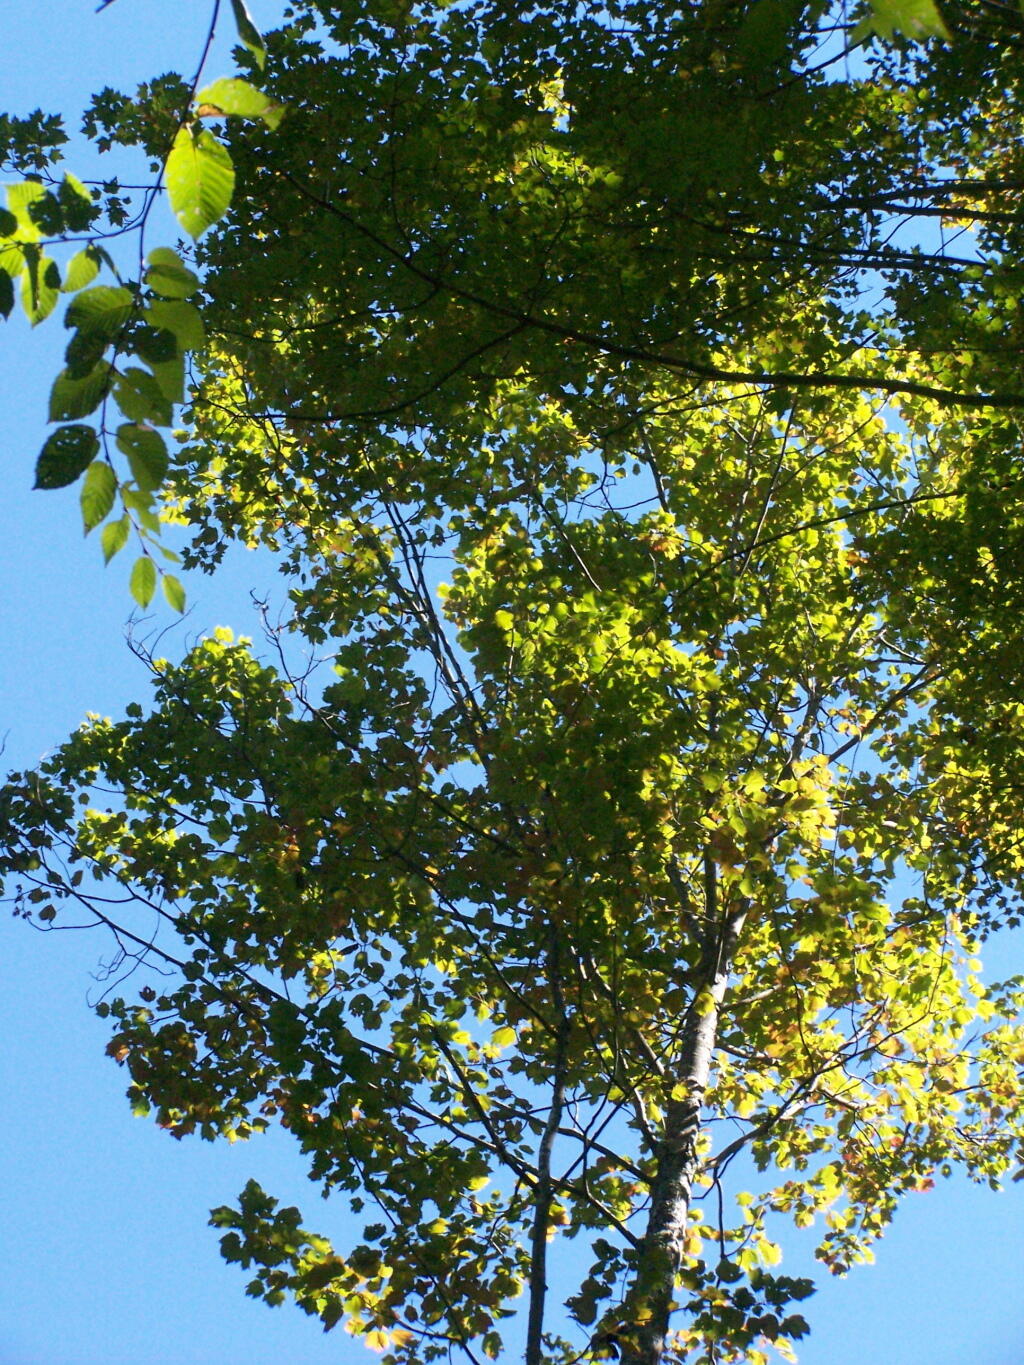 Looking Up at the Ash Trees